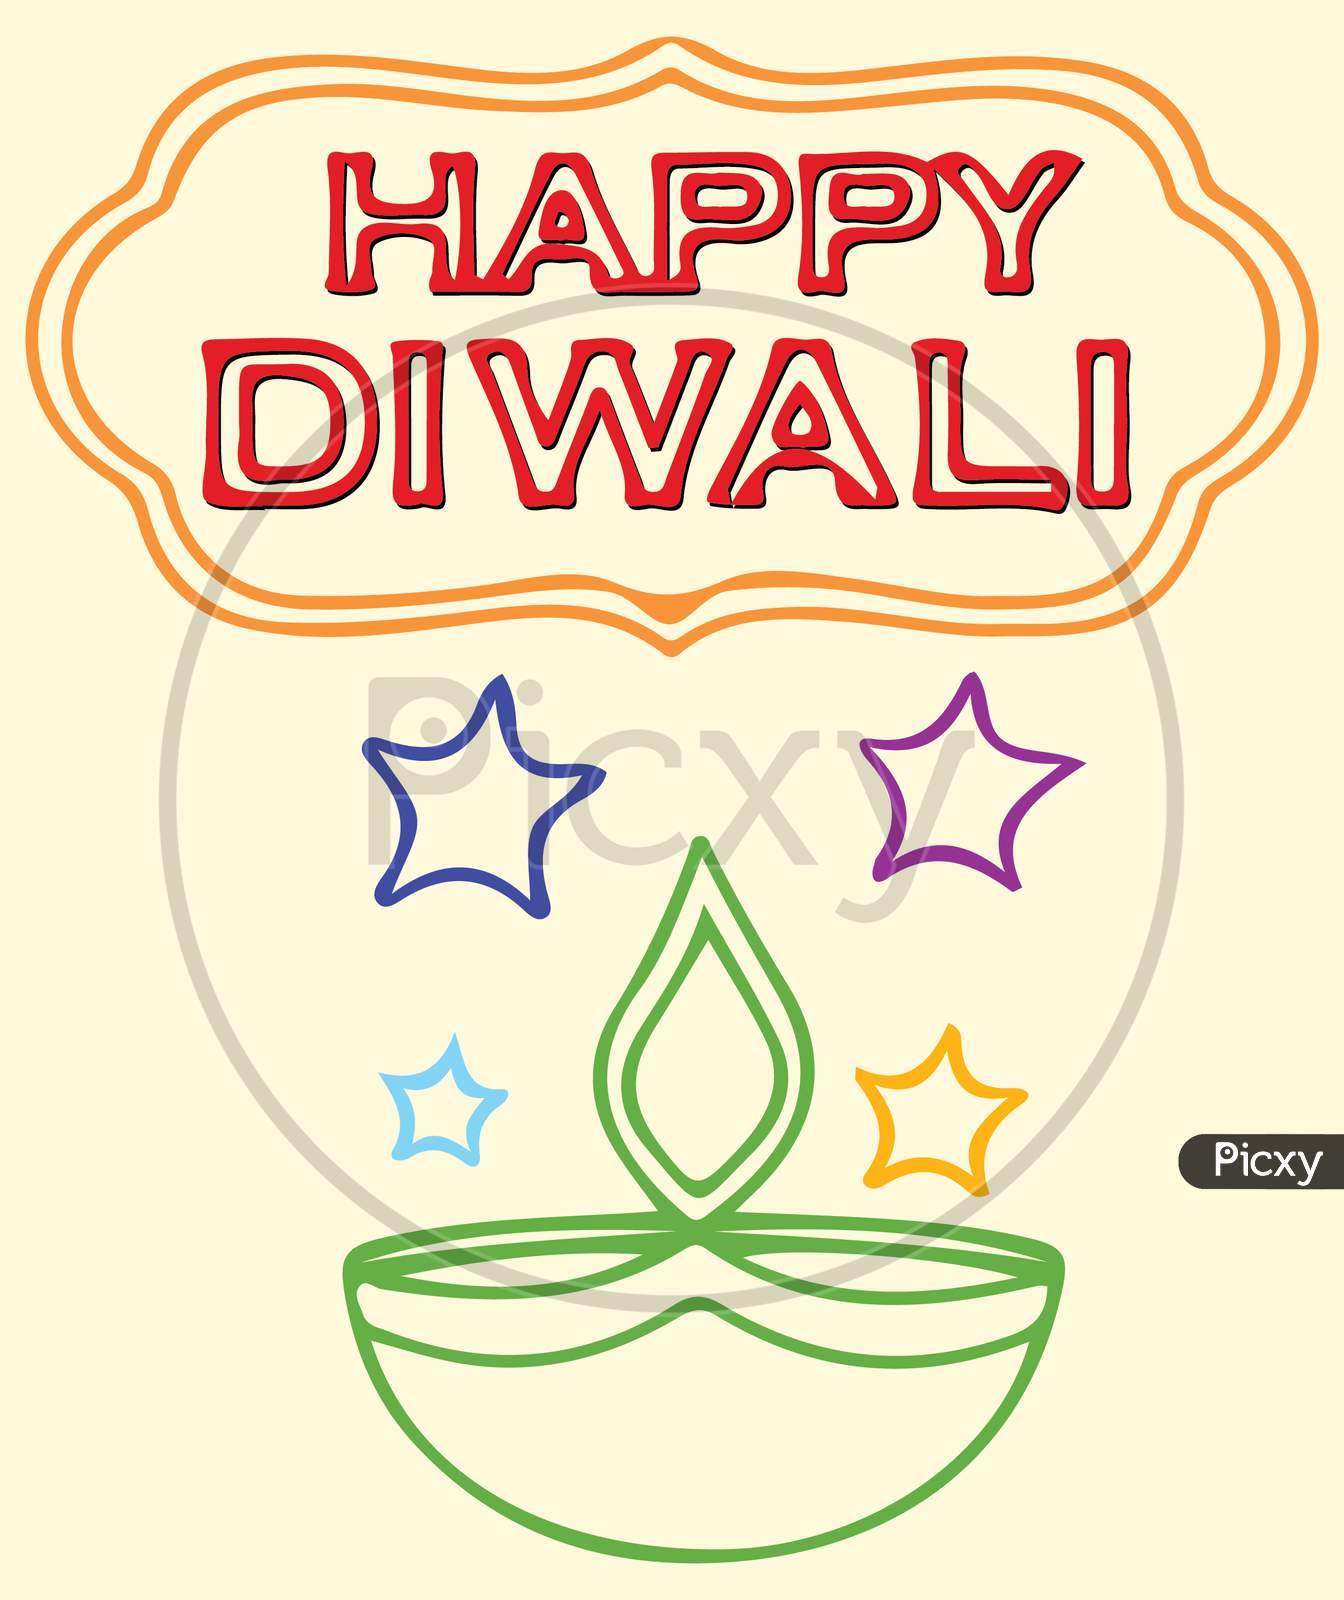 900 Diwali Lamp Drawing Stock Photos Pictures  RoyaltyFree Images   iStock